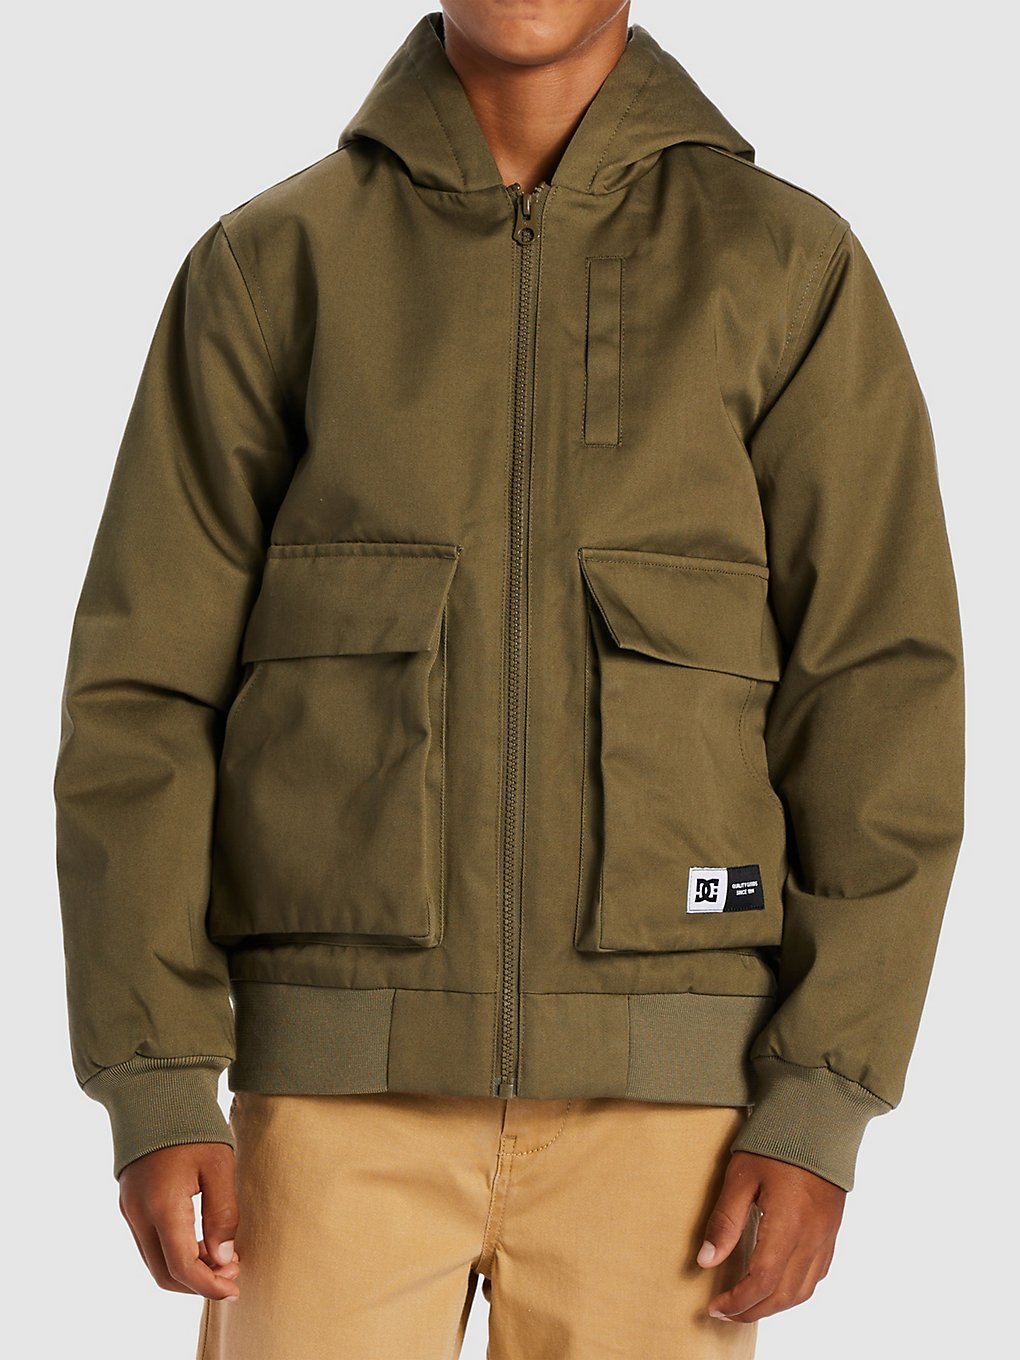 DC Escalate Padded Jacke capers kaufen